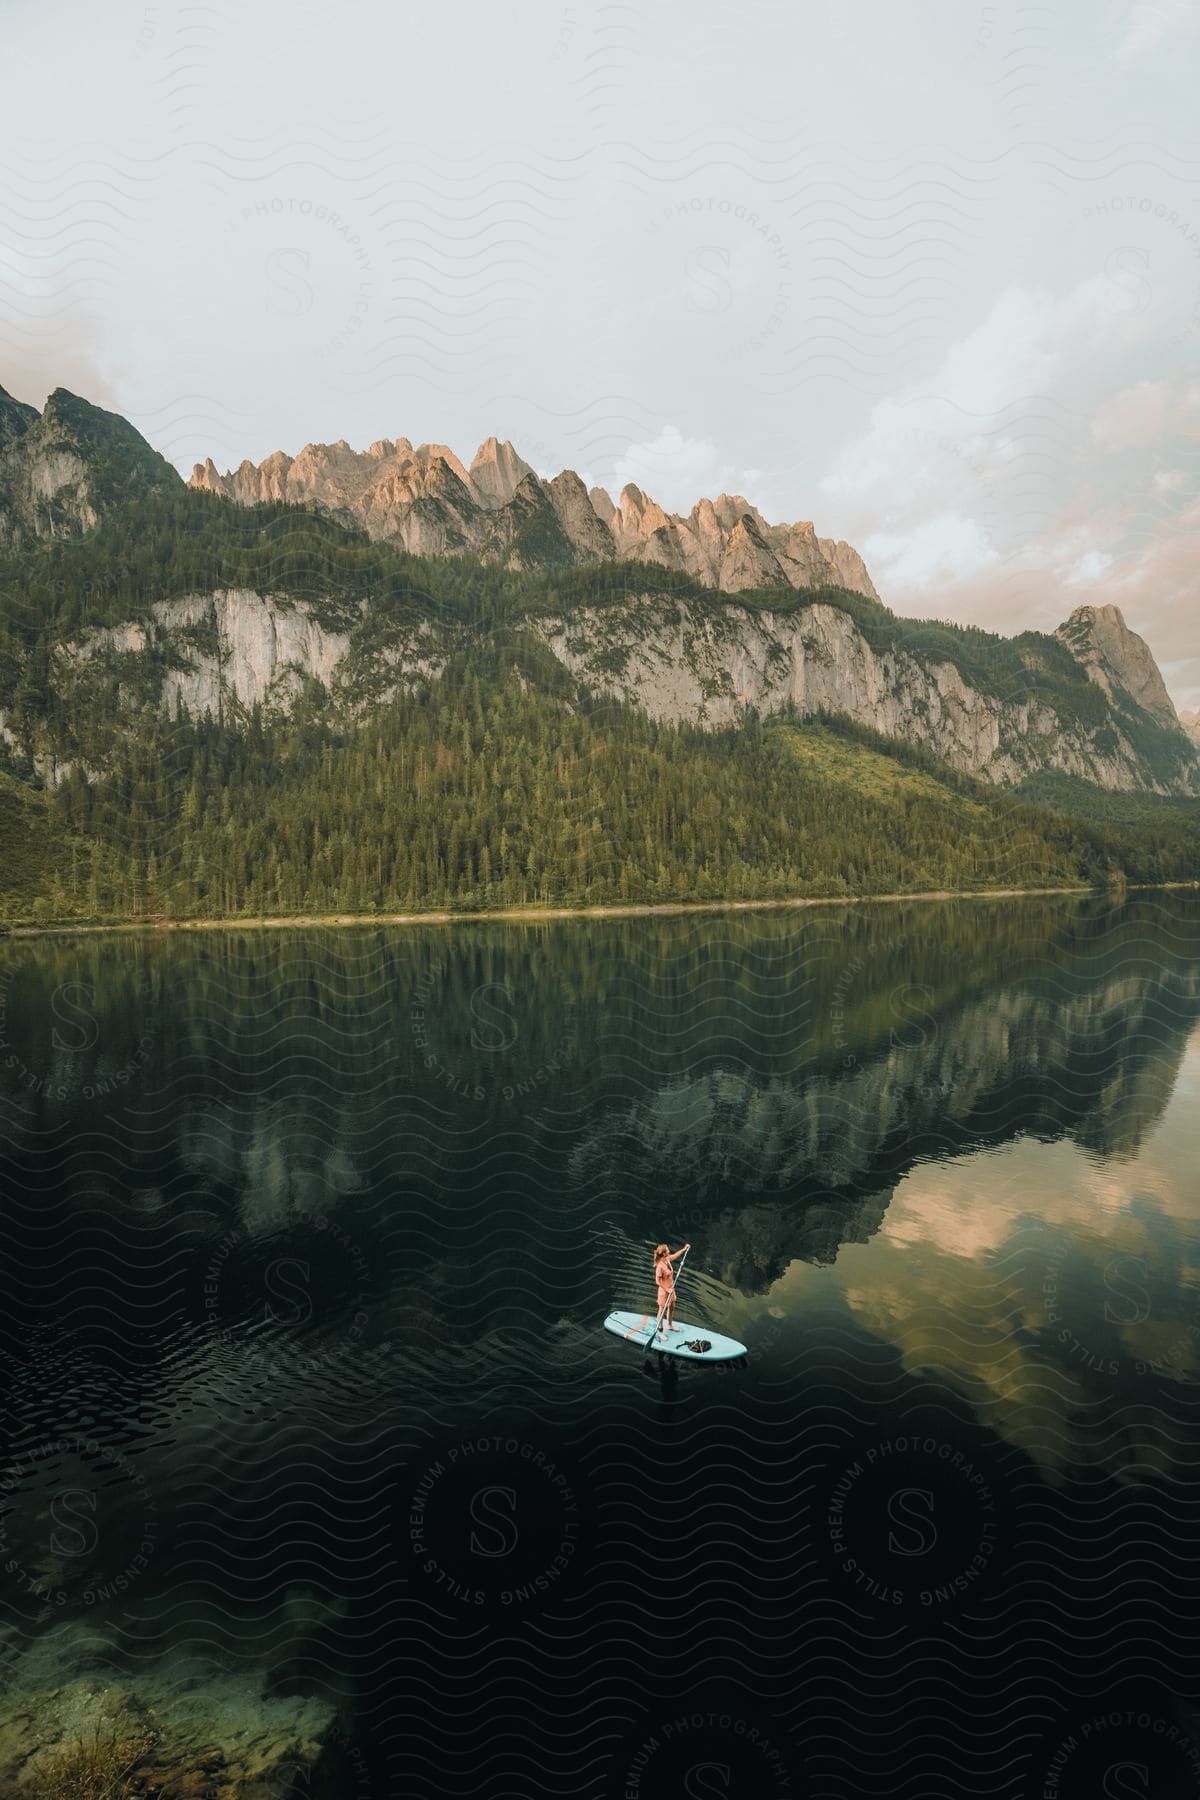 Woman paddleboarding on calm lake with forested mountain reflection in the water